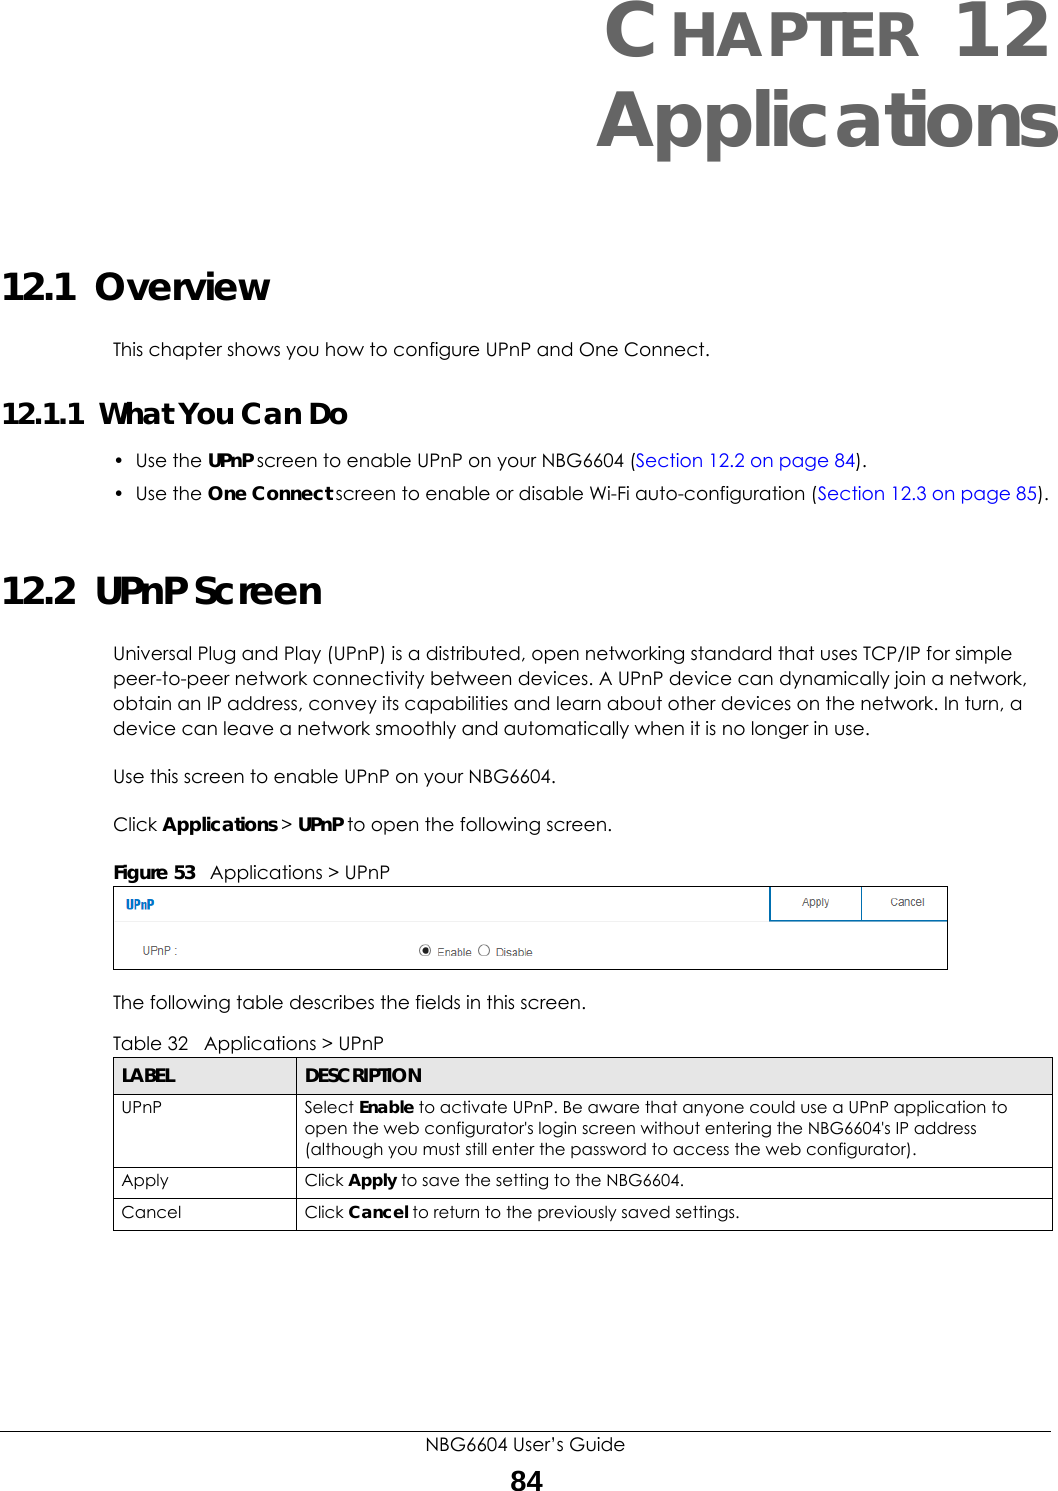 NBG6604 User’s Guide84CHAPTER 12 Applications12.1  OverviewThis chapter shows you how to configure UPnP and One Connect.12.1.1  What You Can Do• Use the UPnP screen to enable UPnP on your NBG6604 (Section 12.2 on page 84).• Use the One Connect screen to enable or disable Wi-Fi auto-configuration (Section 12.3 on page 85).12.2  UPnP ScreenUniversal Plug and Play (UPnP) is a distributed, open networking standard that uses TCP/IP for simple peer-to-peer network connectivity between devices. A UPnP device can dynamically join a network, obtain an IP address, convey its capabilities and learn about other devices on the network. In turn, a device can leave a network smoothly and automatically when it is no longer in use.Use this screen to enable UPnP on your NBG6604.Click Applications &gt; UPnP to open the following screen. Figure 53   Applications &gt; UPnPThe following table describes the fields in this screen.Table 32   Applications &gt; UPnP LABEL DESCRIPTIONUPnP Select Enable to activate UPnP. Be aware that anyone could use a UPnP application to open the web configurator&apos;s login screen without entering the NBG6604&apos;s IP address (although you must still enter the password to access the web configurator).Apply Click Apply to save the setting to the NBG6604.Cancel Click Cancel to return to the previously saved settings.